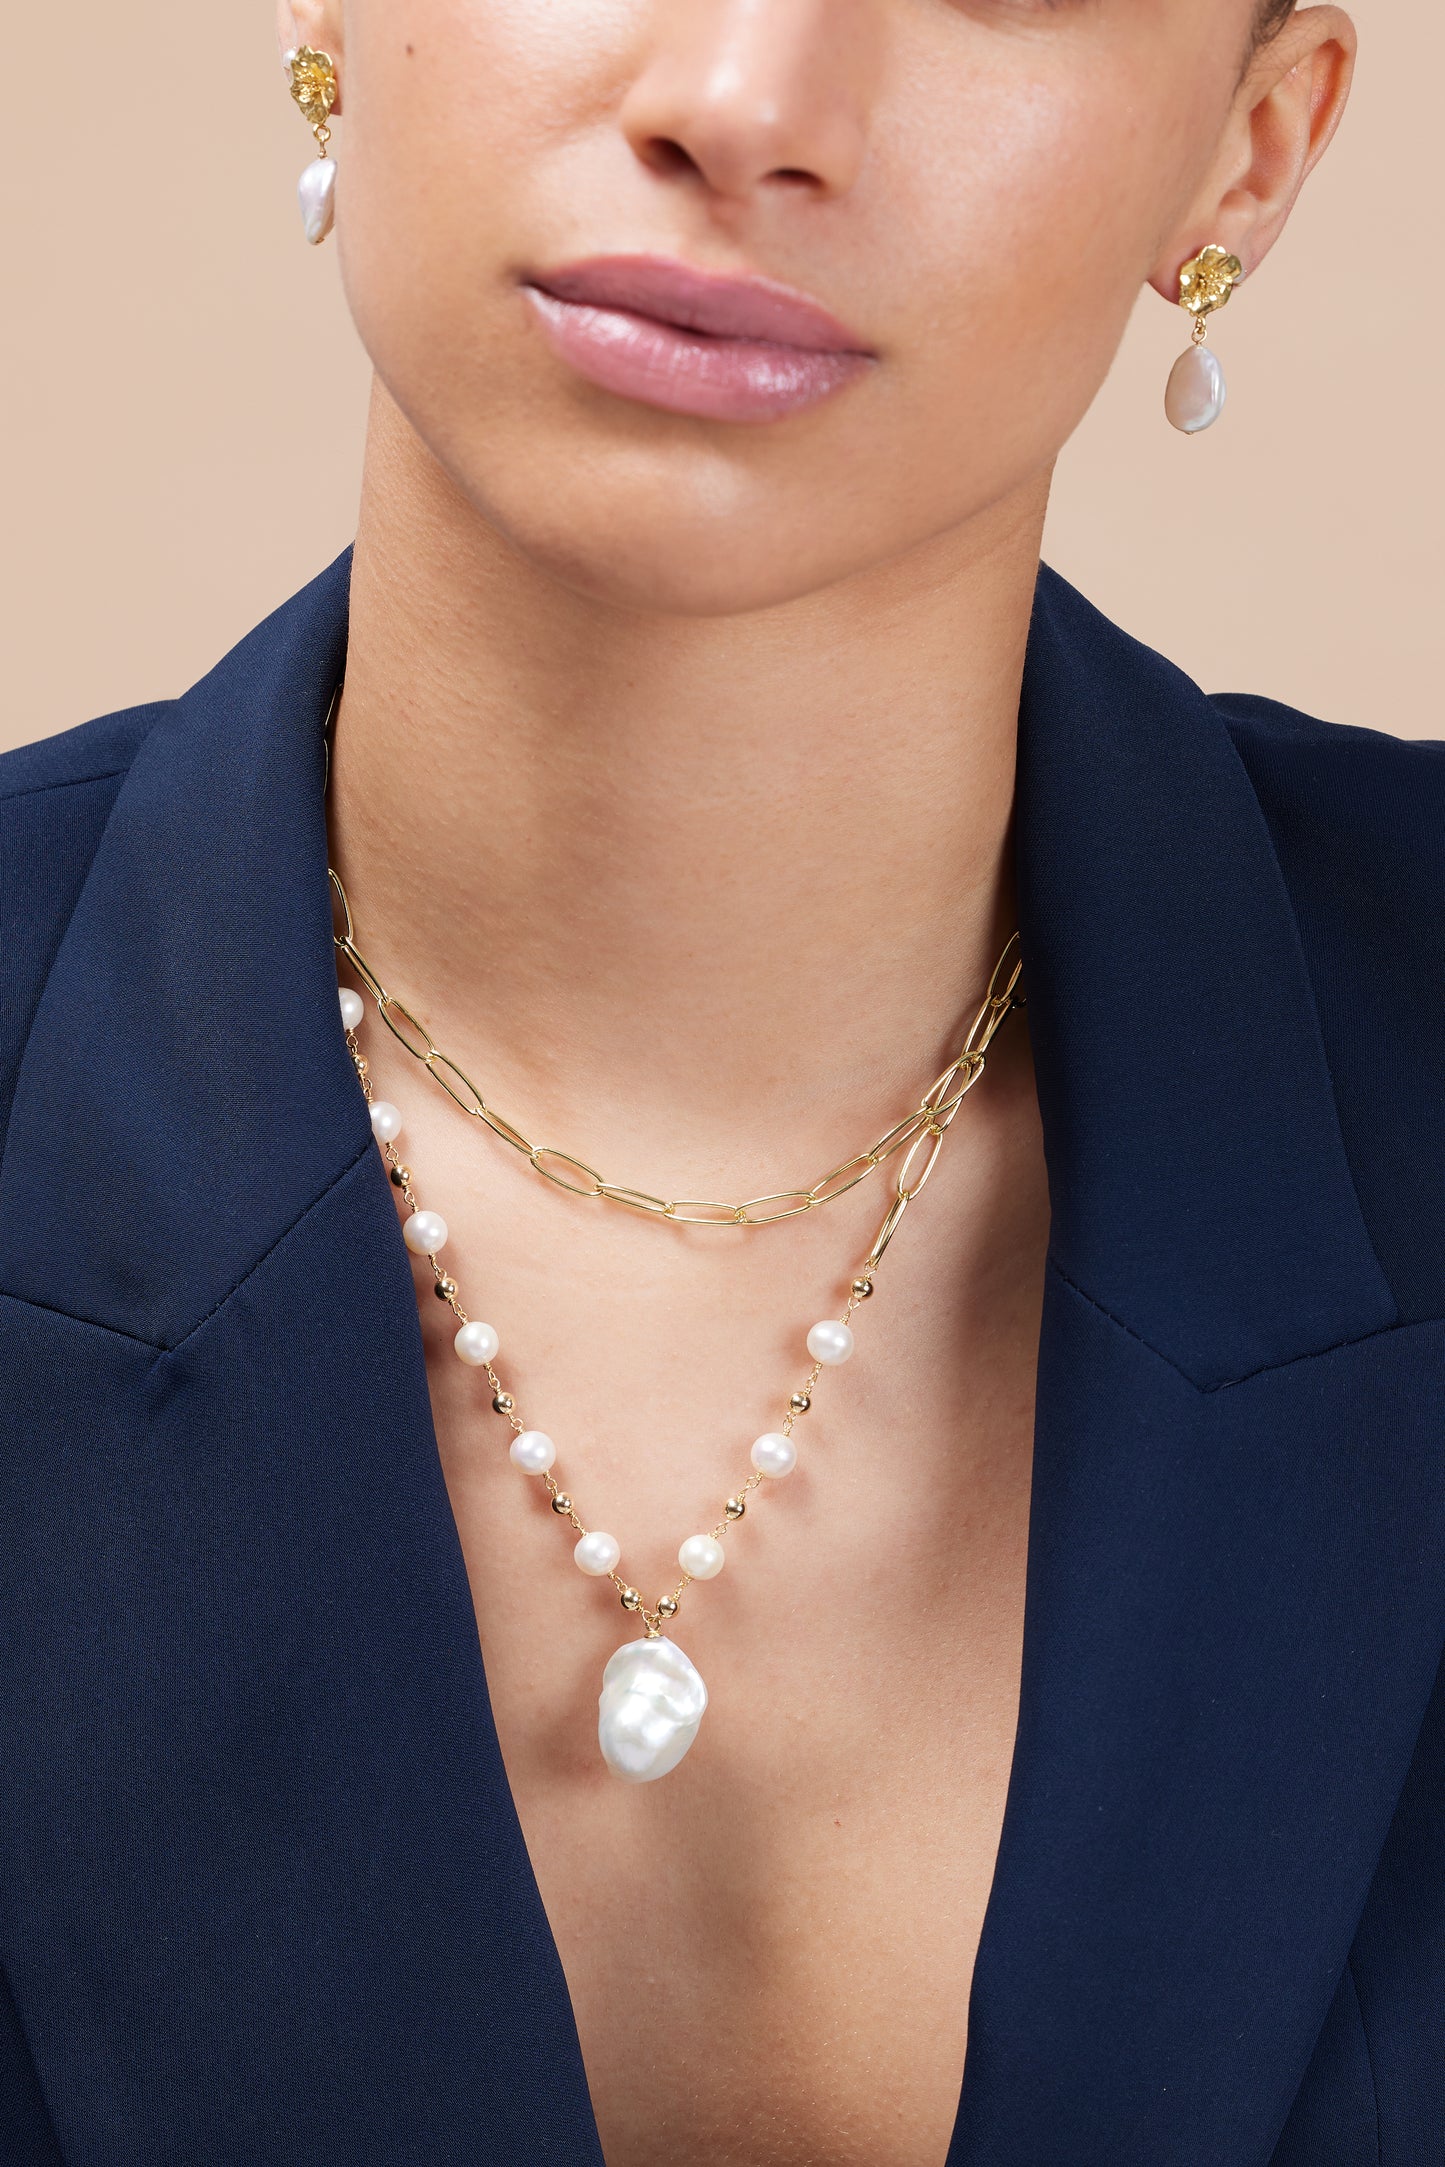 Decus large baroque 'fireball' cultured freshwater pearl drop on long gold chain